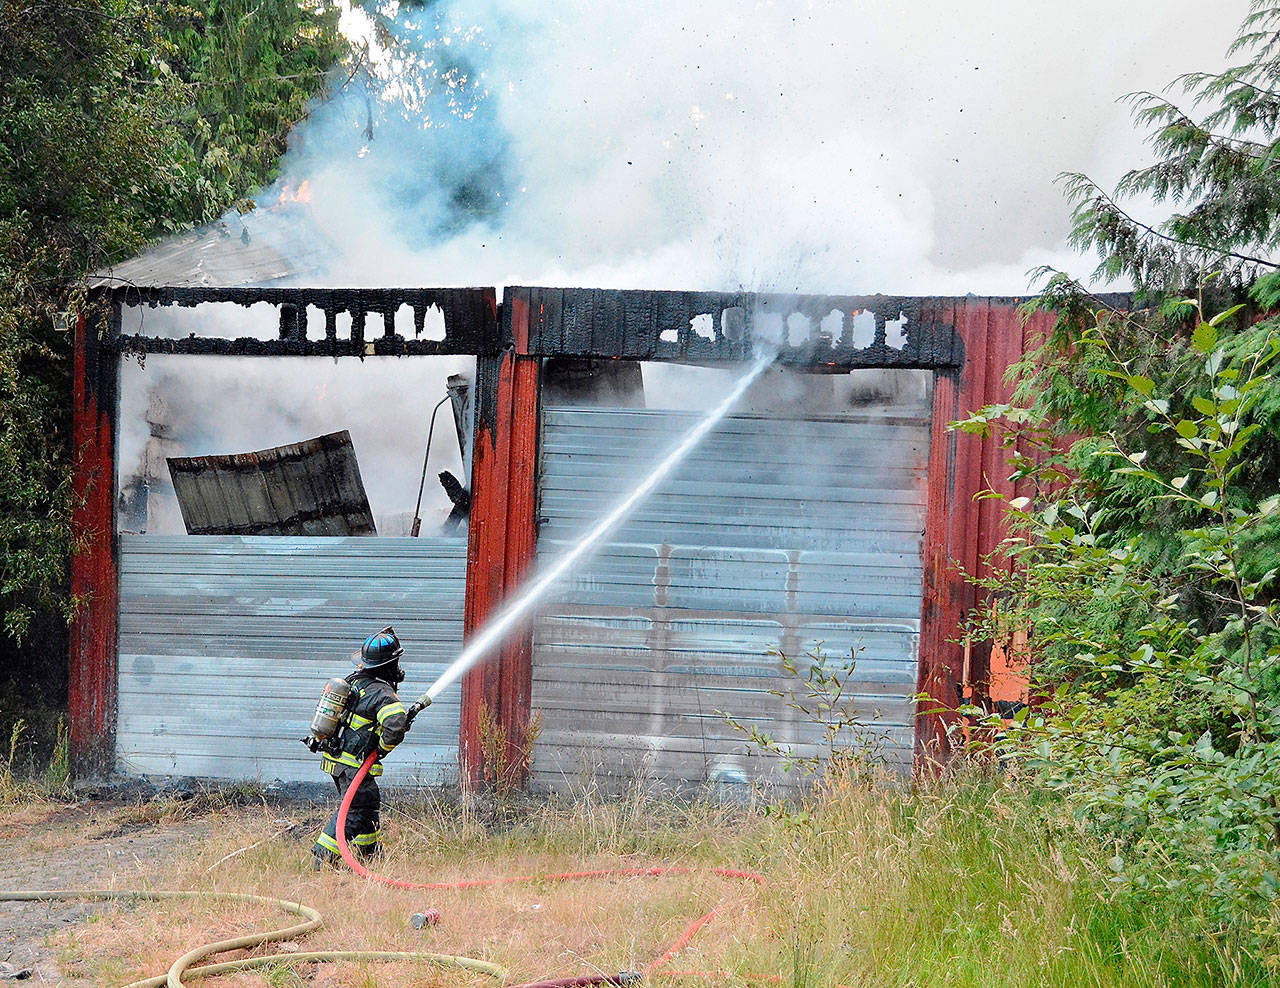 Clallam Fire District No. 2 responded to a structure fire at 243532 U.S. Highway 101 on Wednesday morning. (Jay R. Cline/Clallam Fire District No. 2)